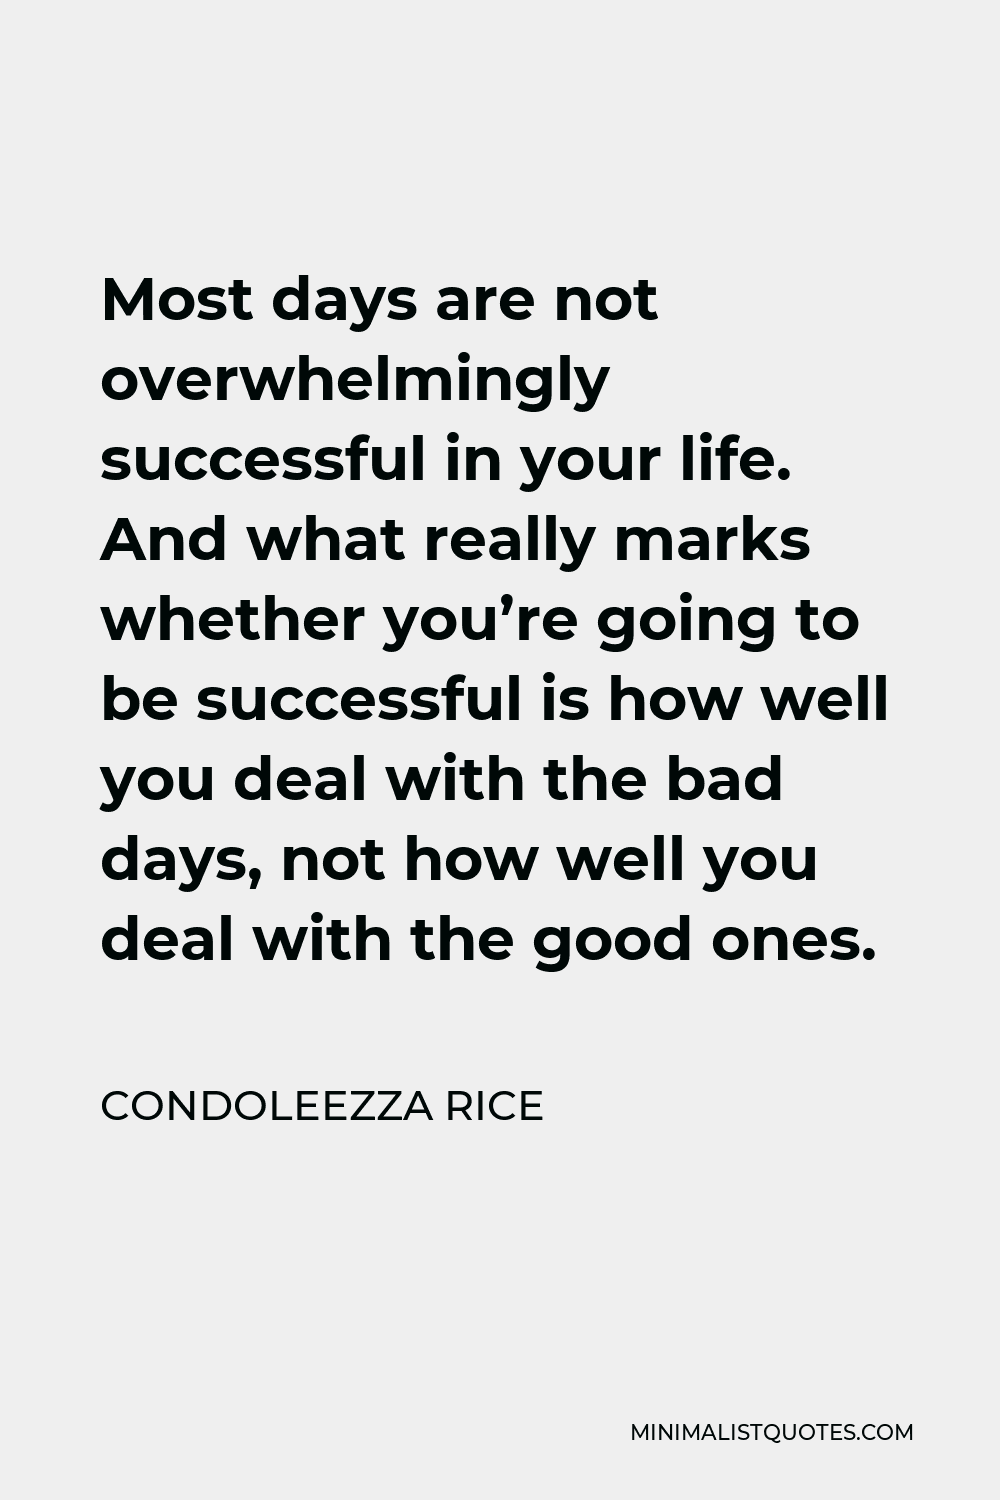 Condoleezza Rice Quote - Most days are not overwhelmingly successful in your life. And what really marks whether you’re going to be successful is how well you deal with the bad days, not how well you deal with the good ones.